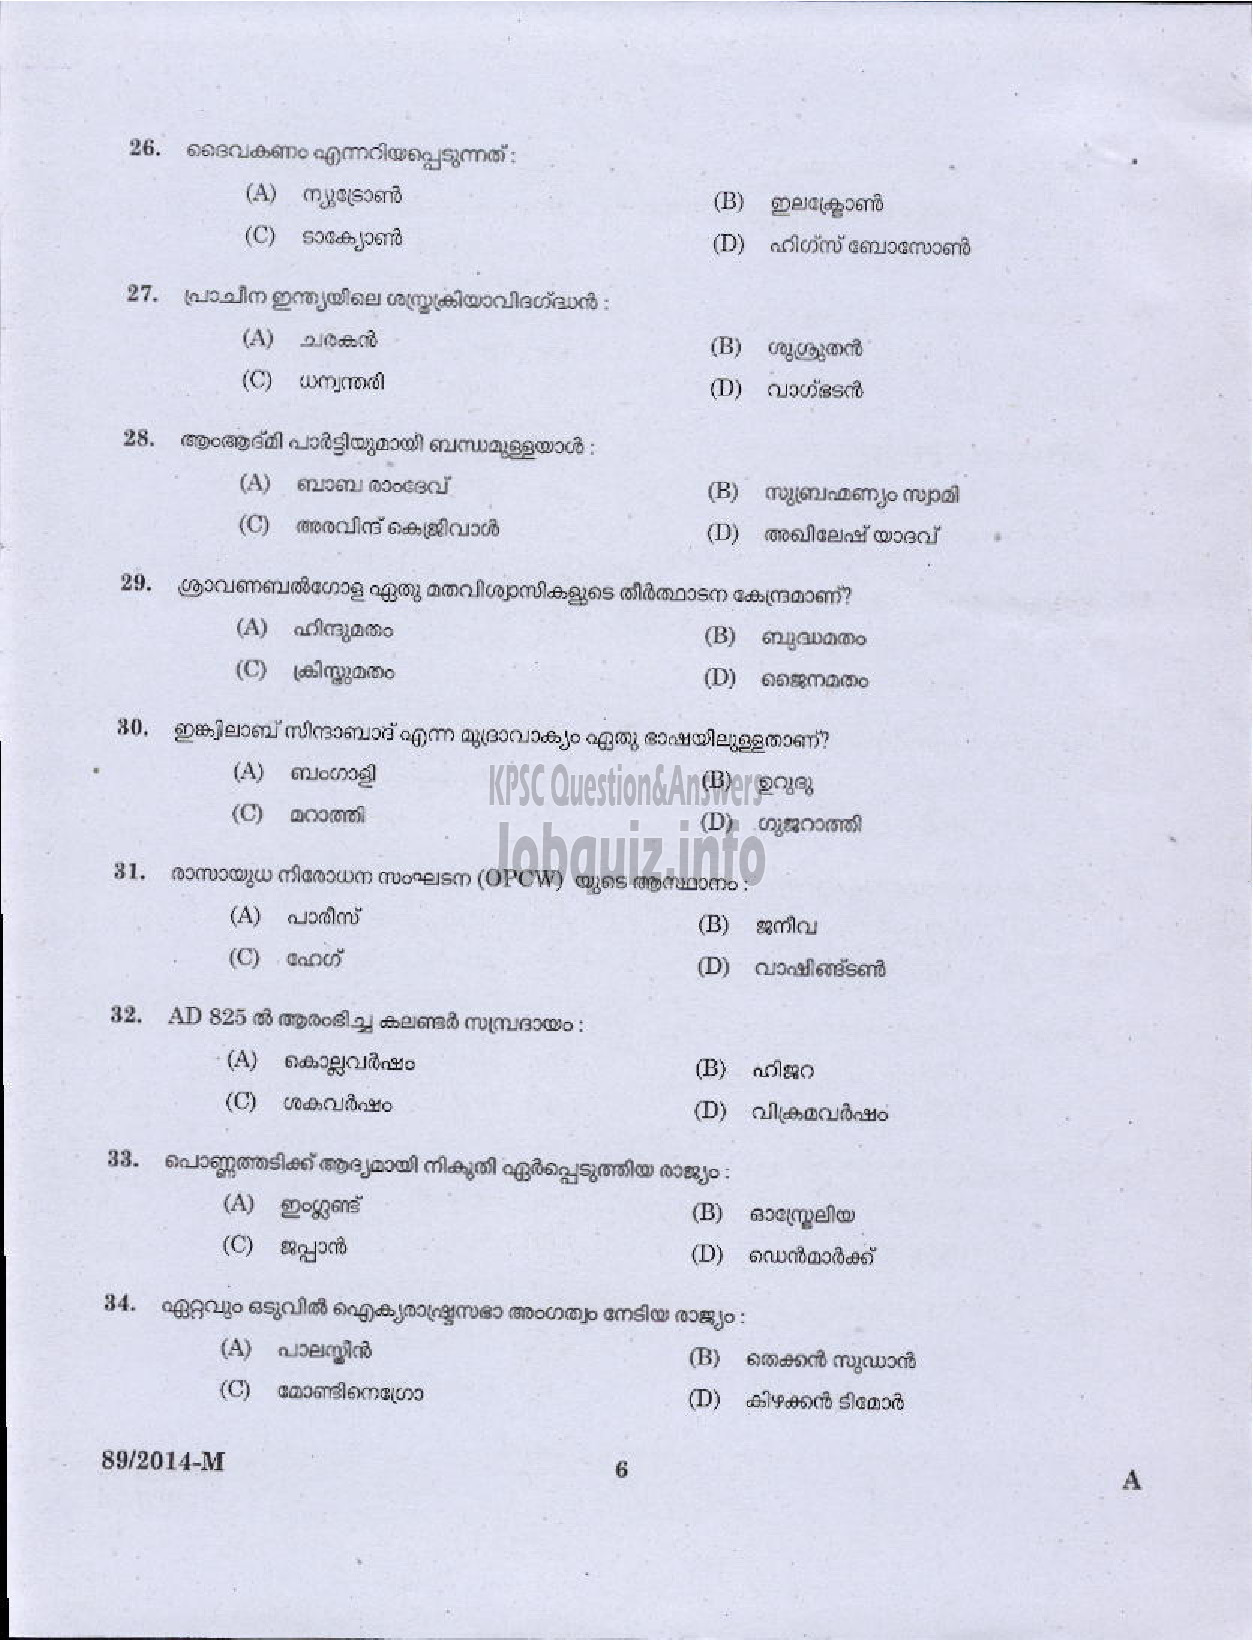 Kerala PSC Question Paper - ATTENDER SR FOR ST ONLY TCC LTD AND LGS NCA OBC VARIOUS KTYM ( Malayalam ) -4